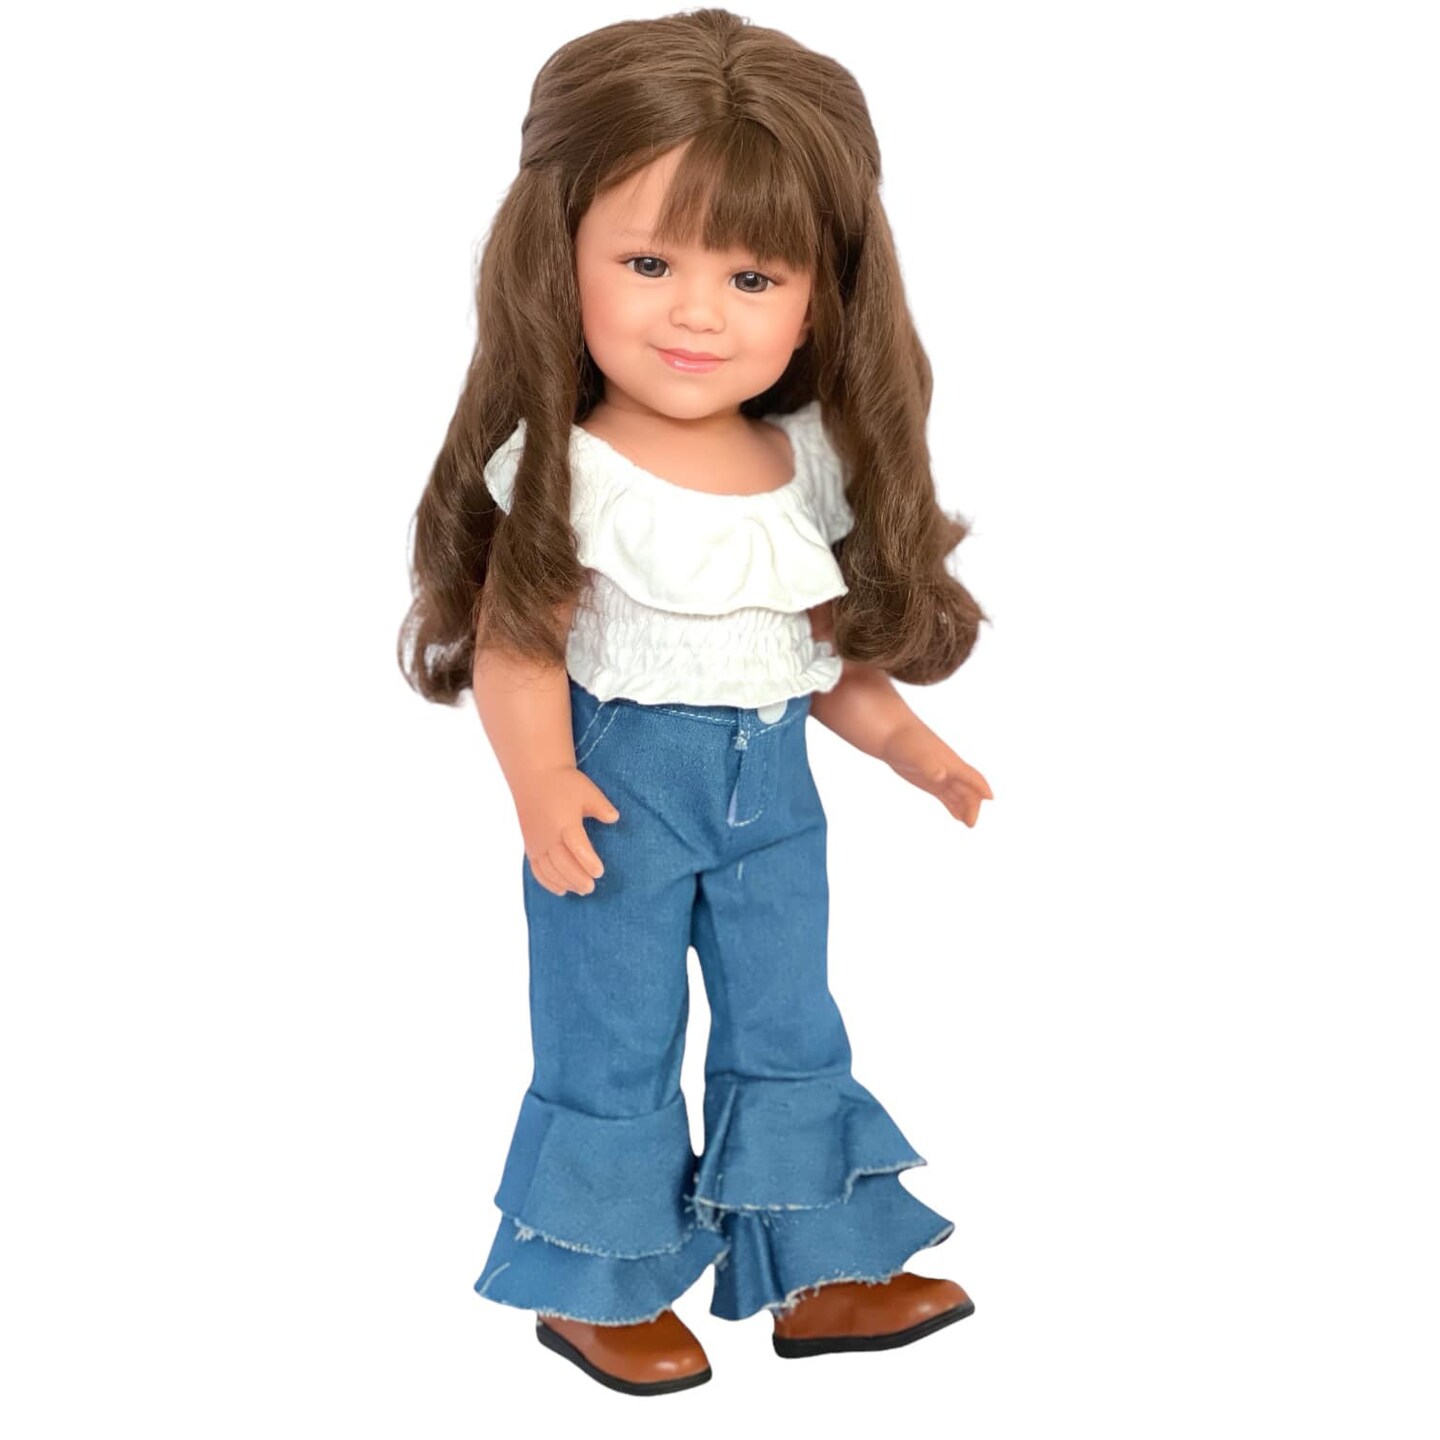 Denim Clothes For 18in. American Doll Girl Doll Outfits Denim